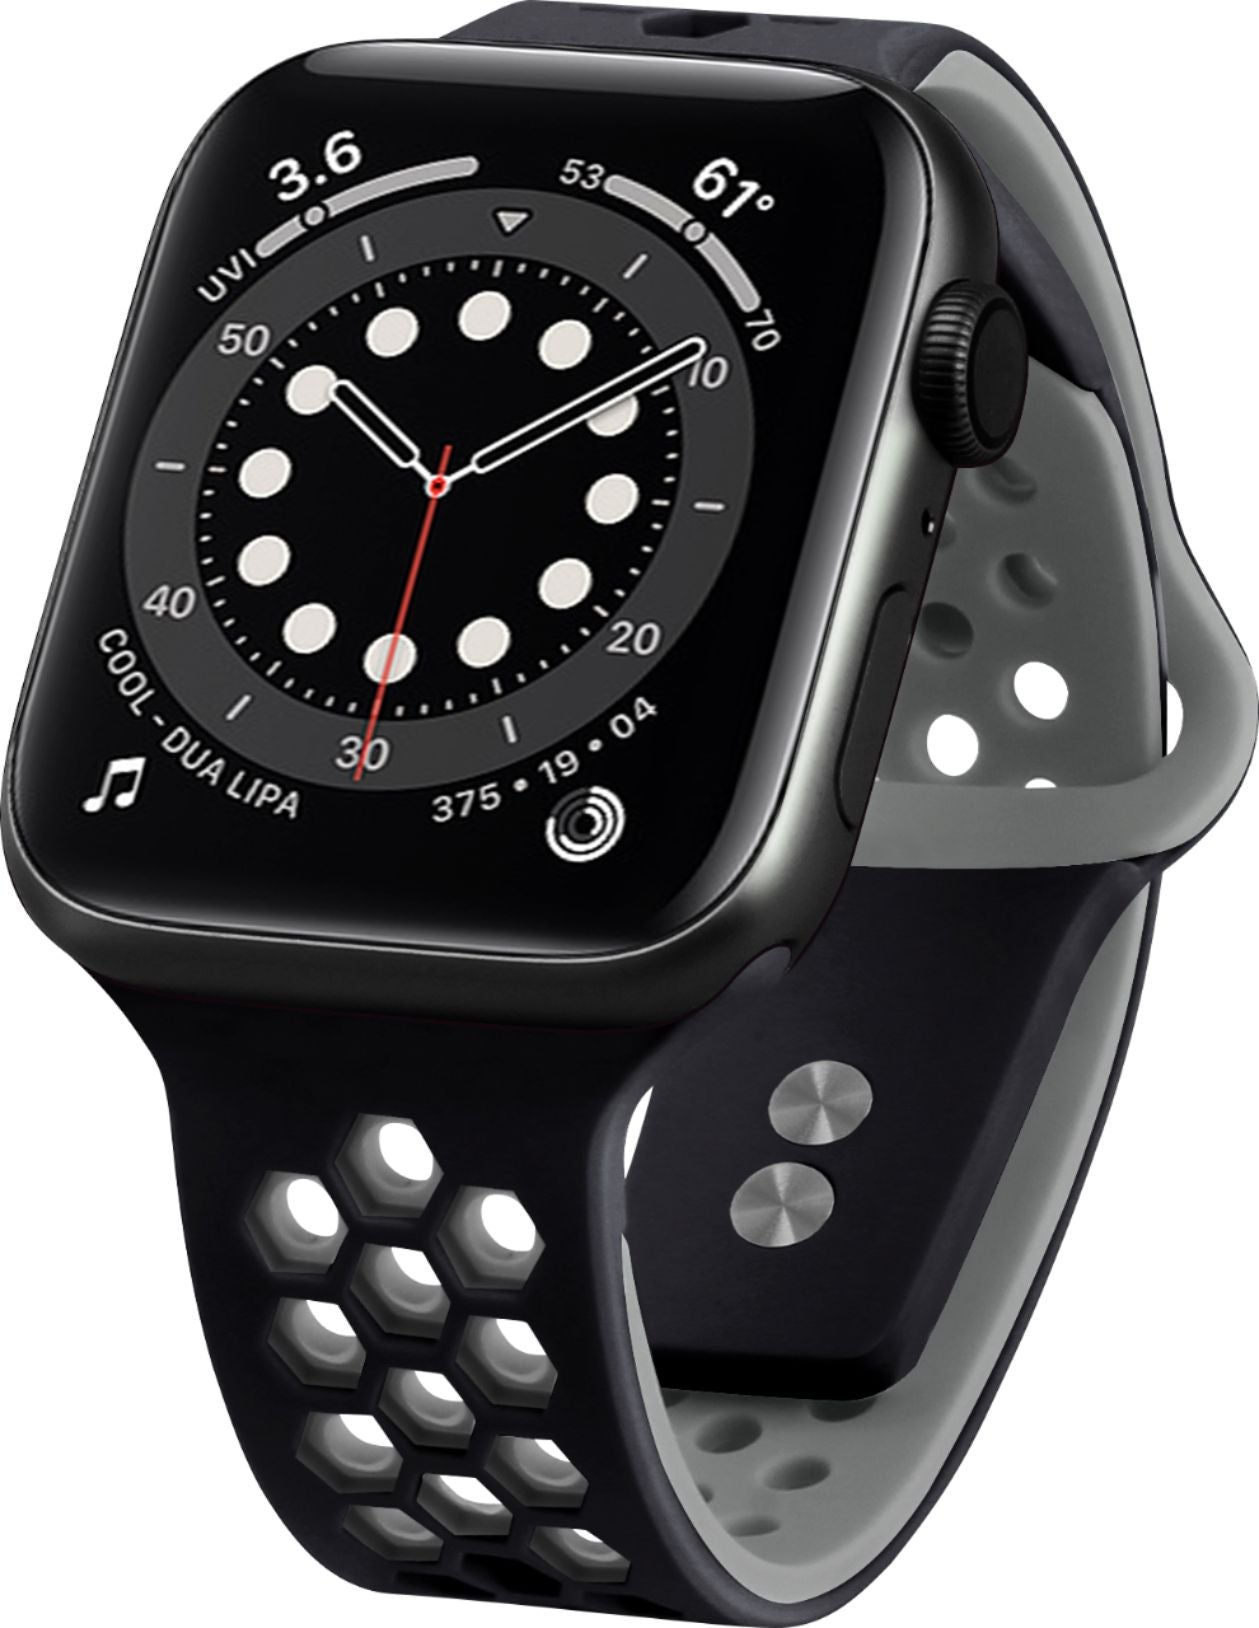 UAG Dot Silicone Watch Band for Apple Watch 38mm and  - Best Buy